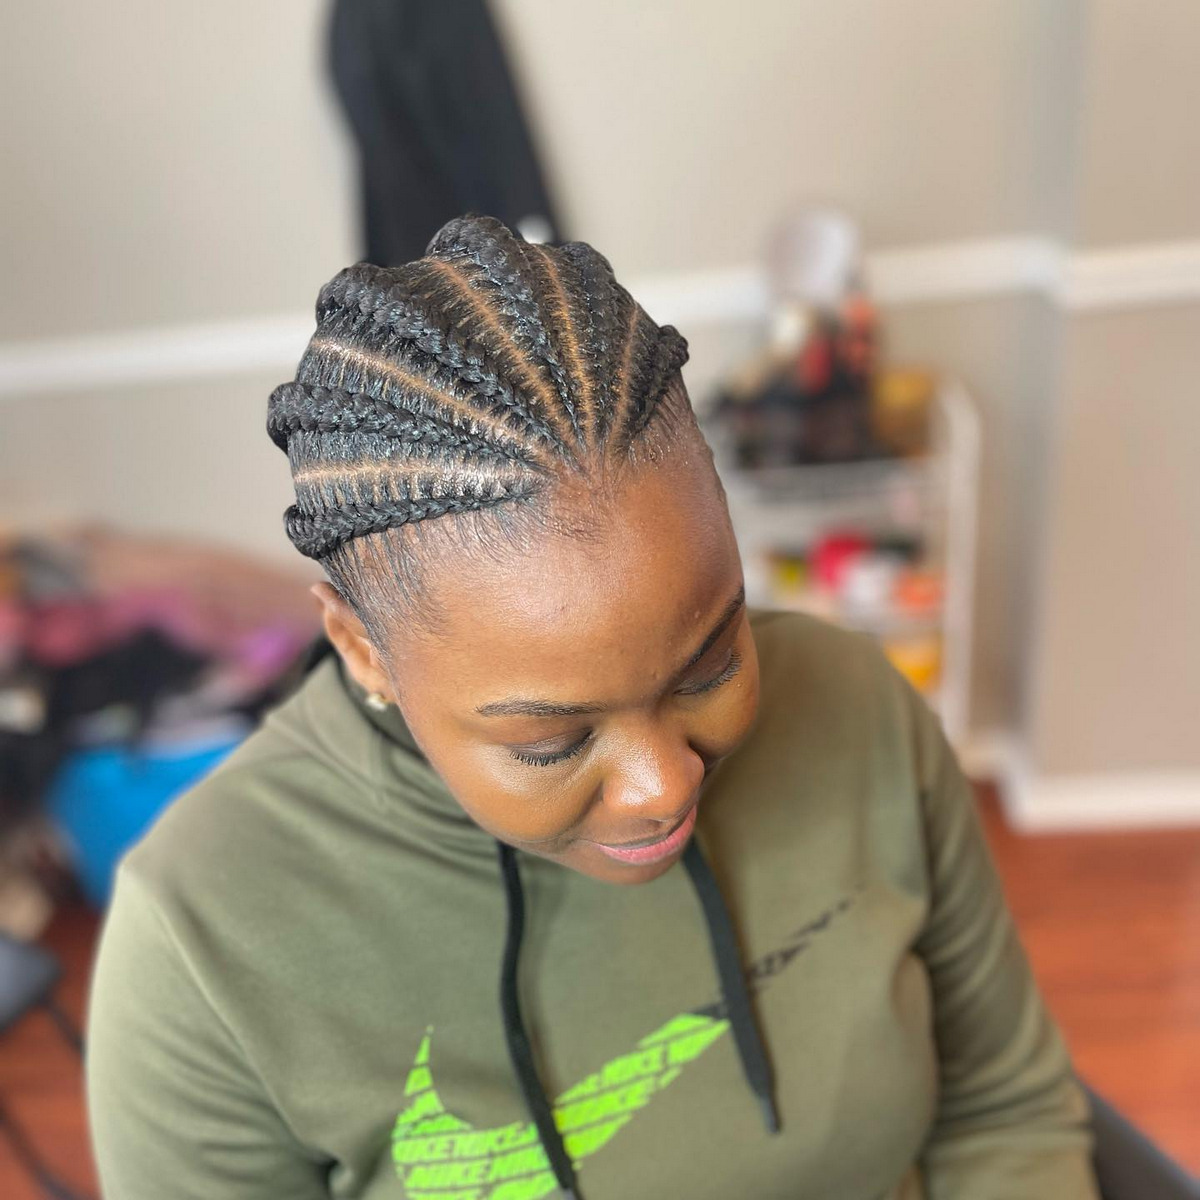 Six Curvy Feed-In Braids to the Back